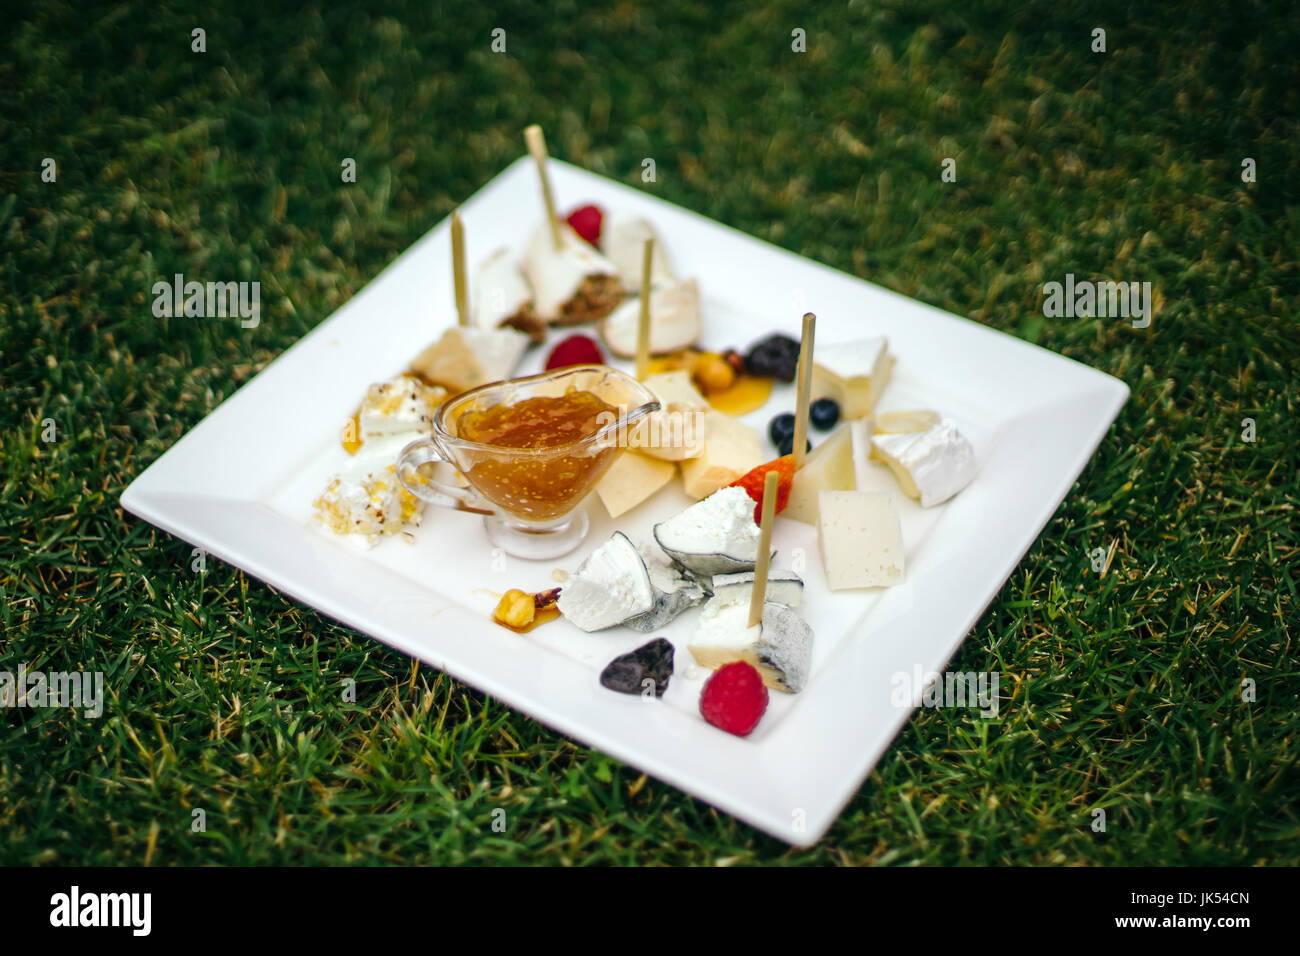 Cheese plate with many kinds of cheese. Exposed on a beautifully trimmed lawn, on a warm summer day. Stock Photo